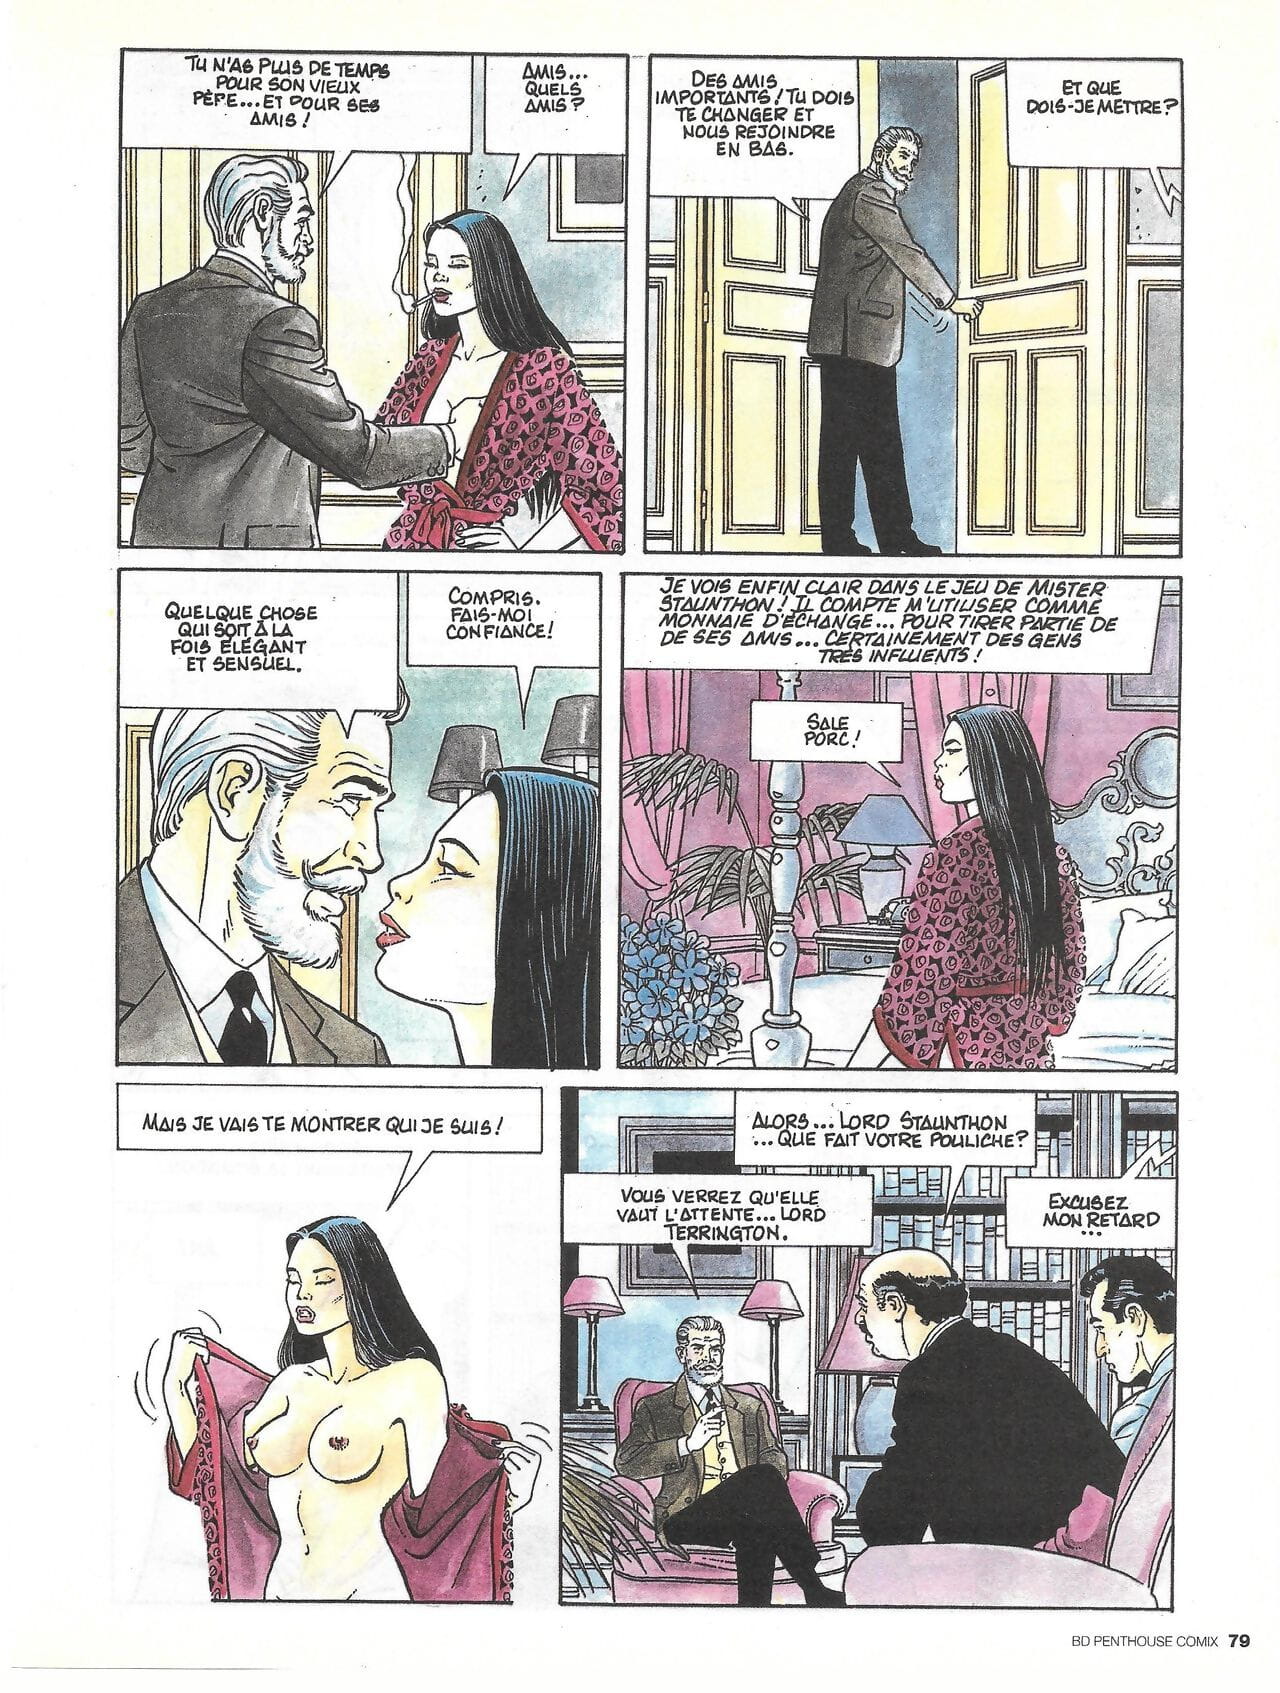 BD penthouse no. 03 Onderdeel 4 page 1